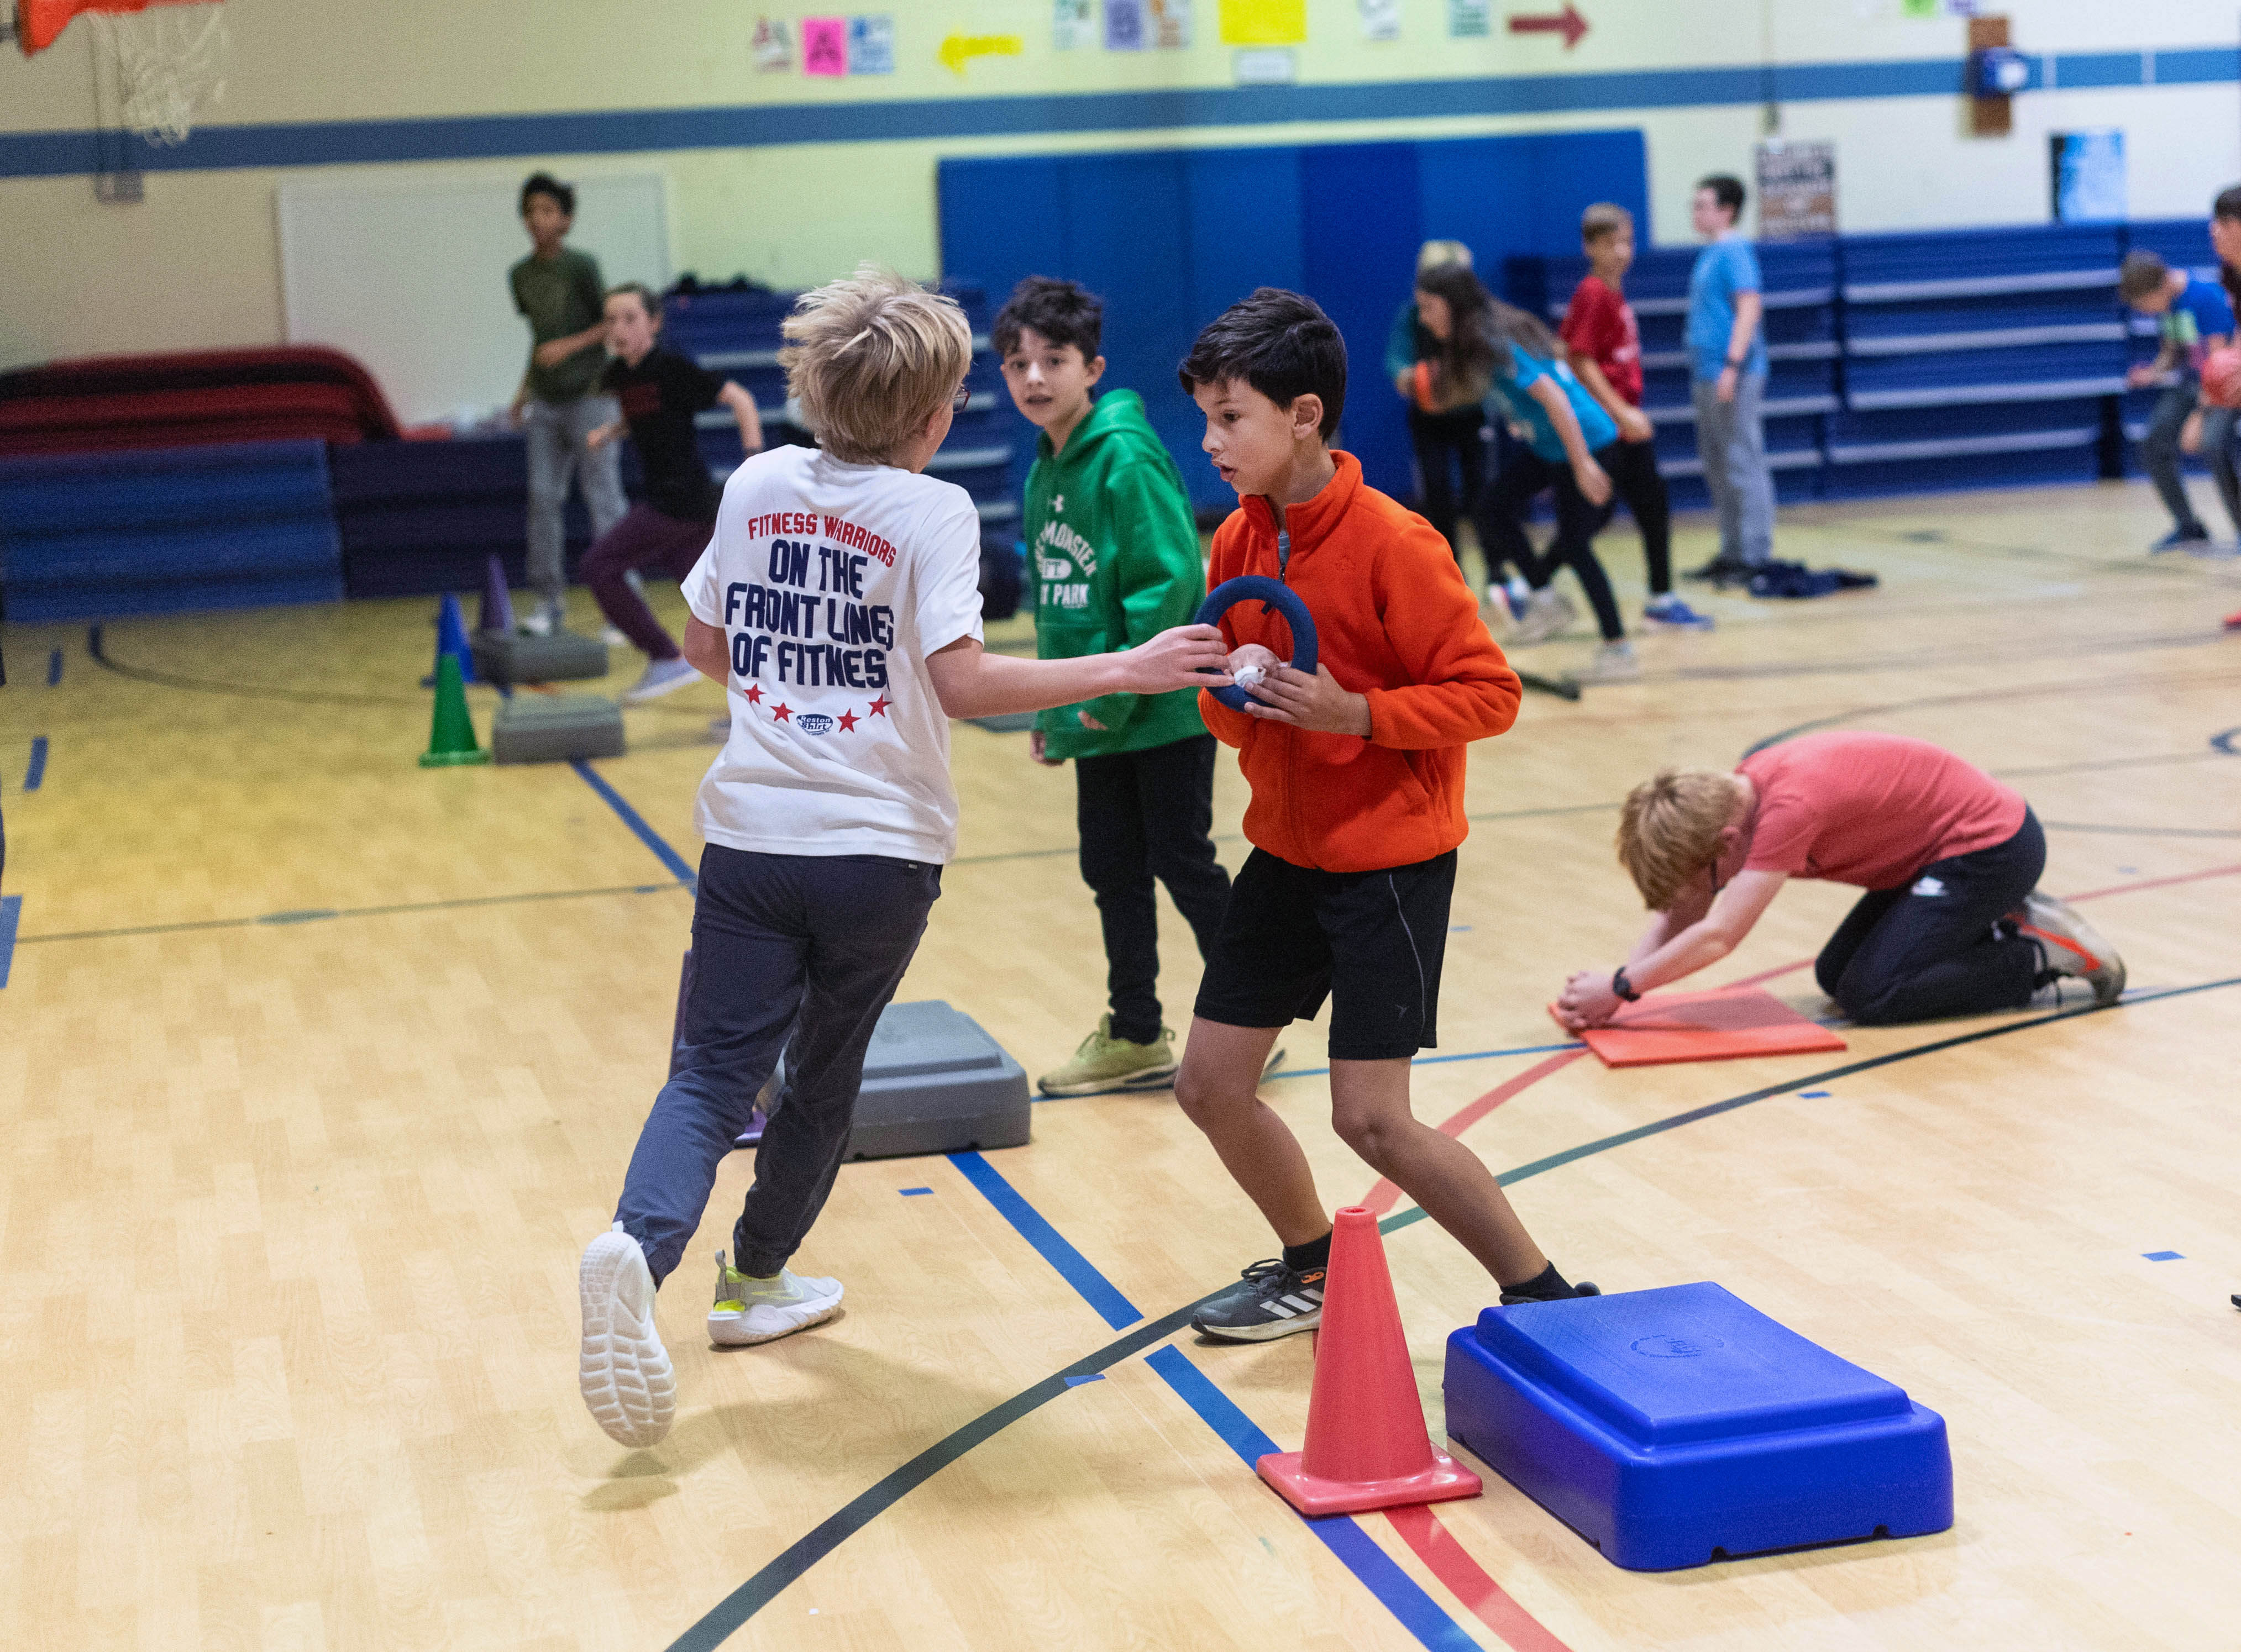 Fitness Warrior participants engage in friendly competition during calisthenics routines. 